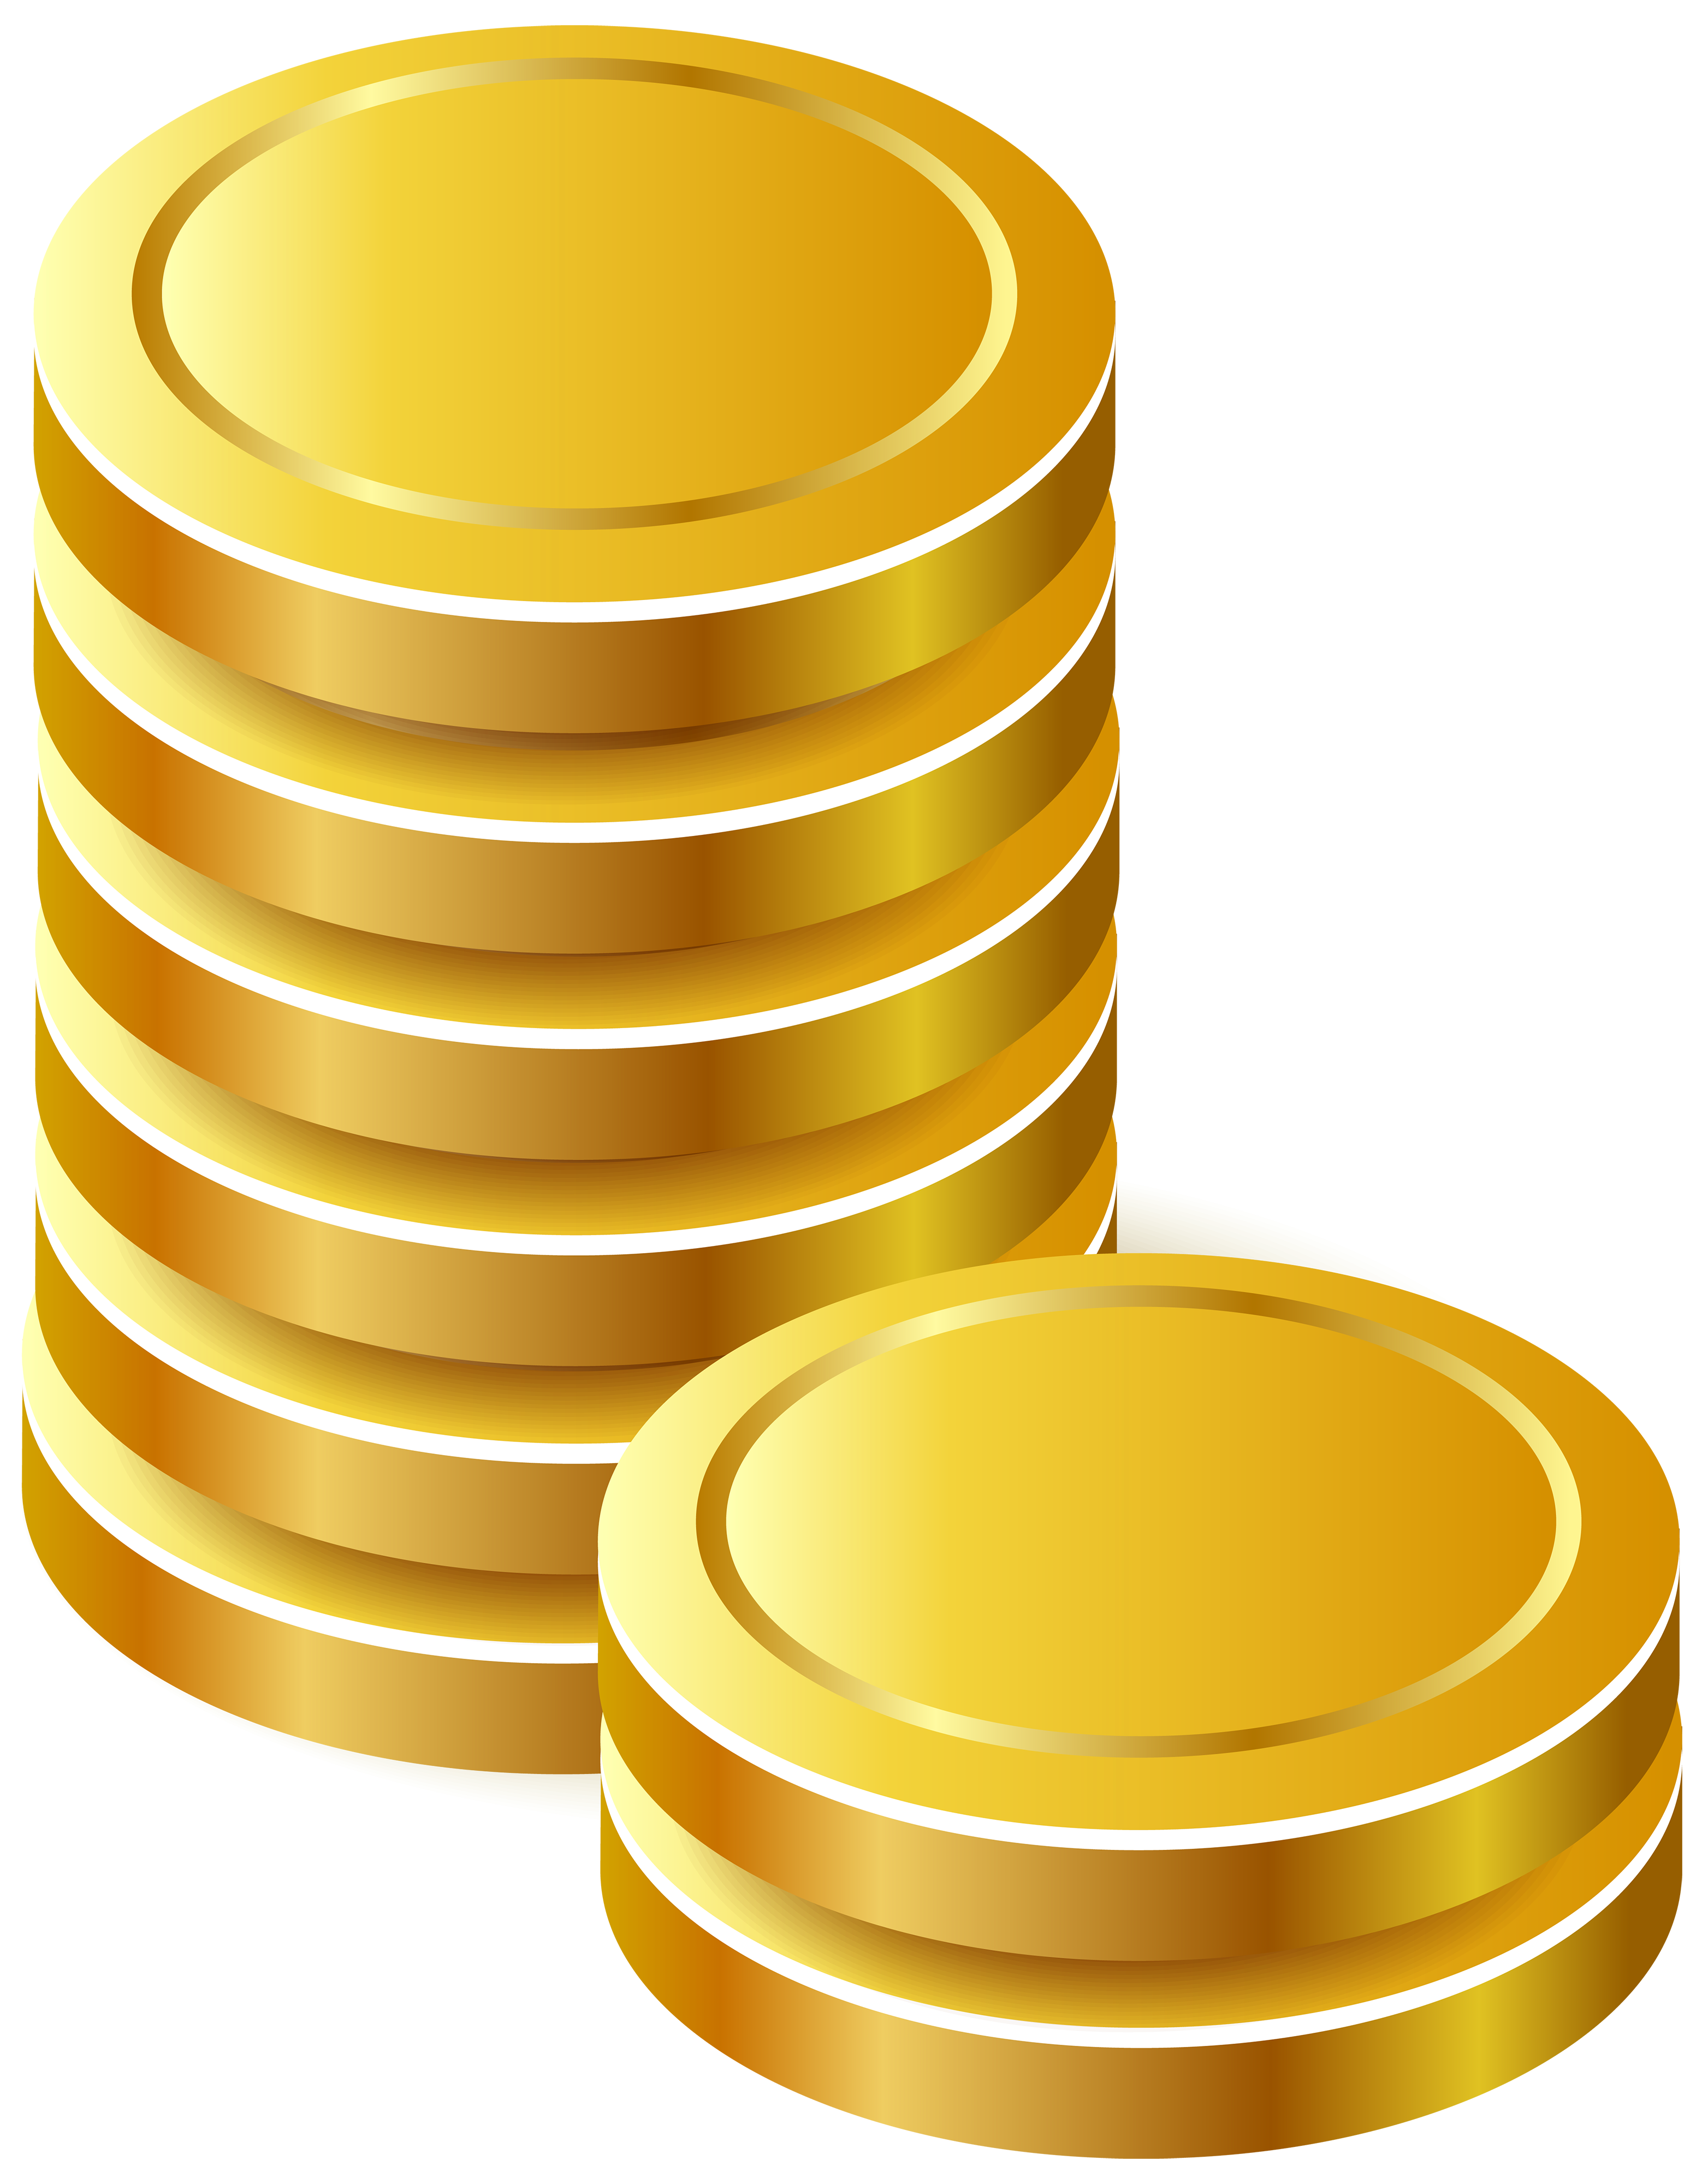 Gold Coins PNG Clipart - Best WEB Clipart